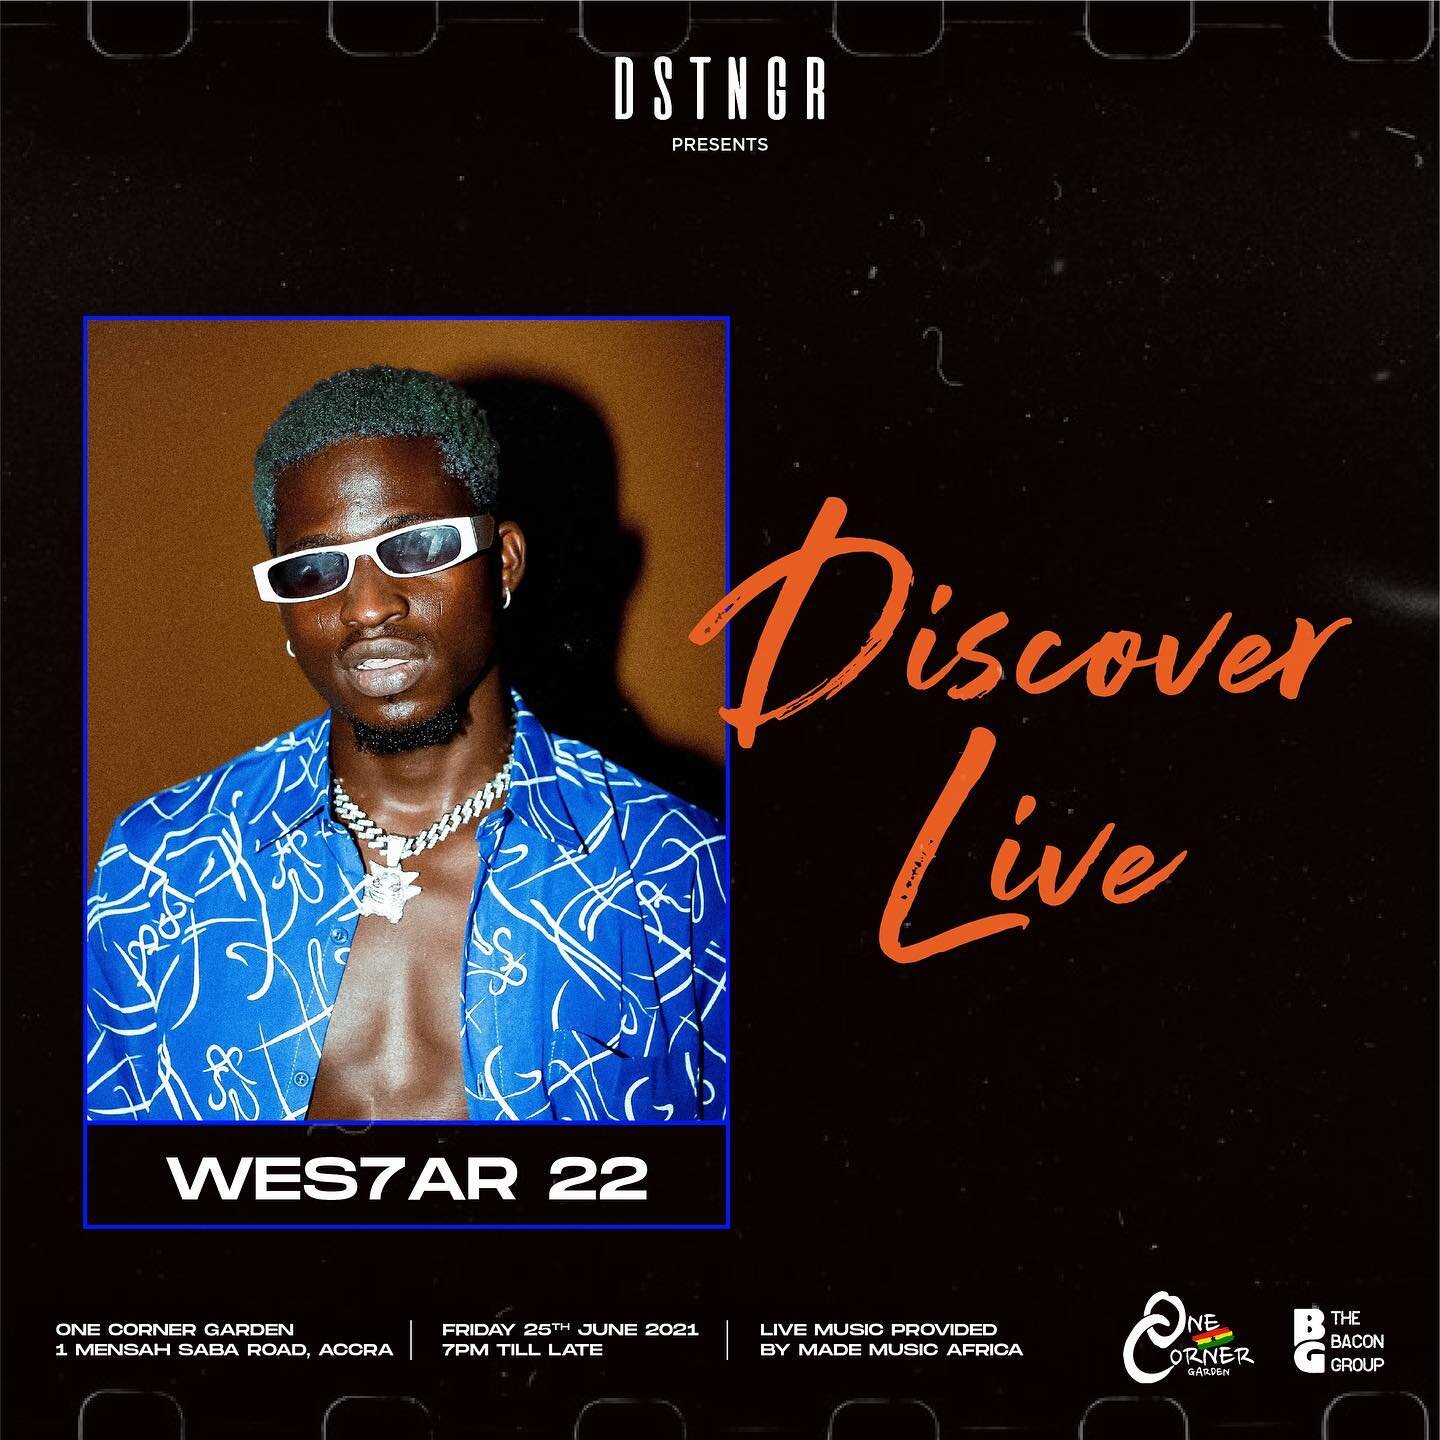 This FRIDAY! Nigerian Afrobeats artist @wes7ar22 will bring his incredible vocals and joyful vibes to &lsquo;DISCOVER LIVE&rsquo; at @onecornergh!

FREE ENTRY! Doors open at 7PM! 

Swipe left to see his limited edition &lsquo;DISCOVER LIVE&rsquo; tee